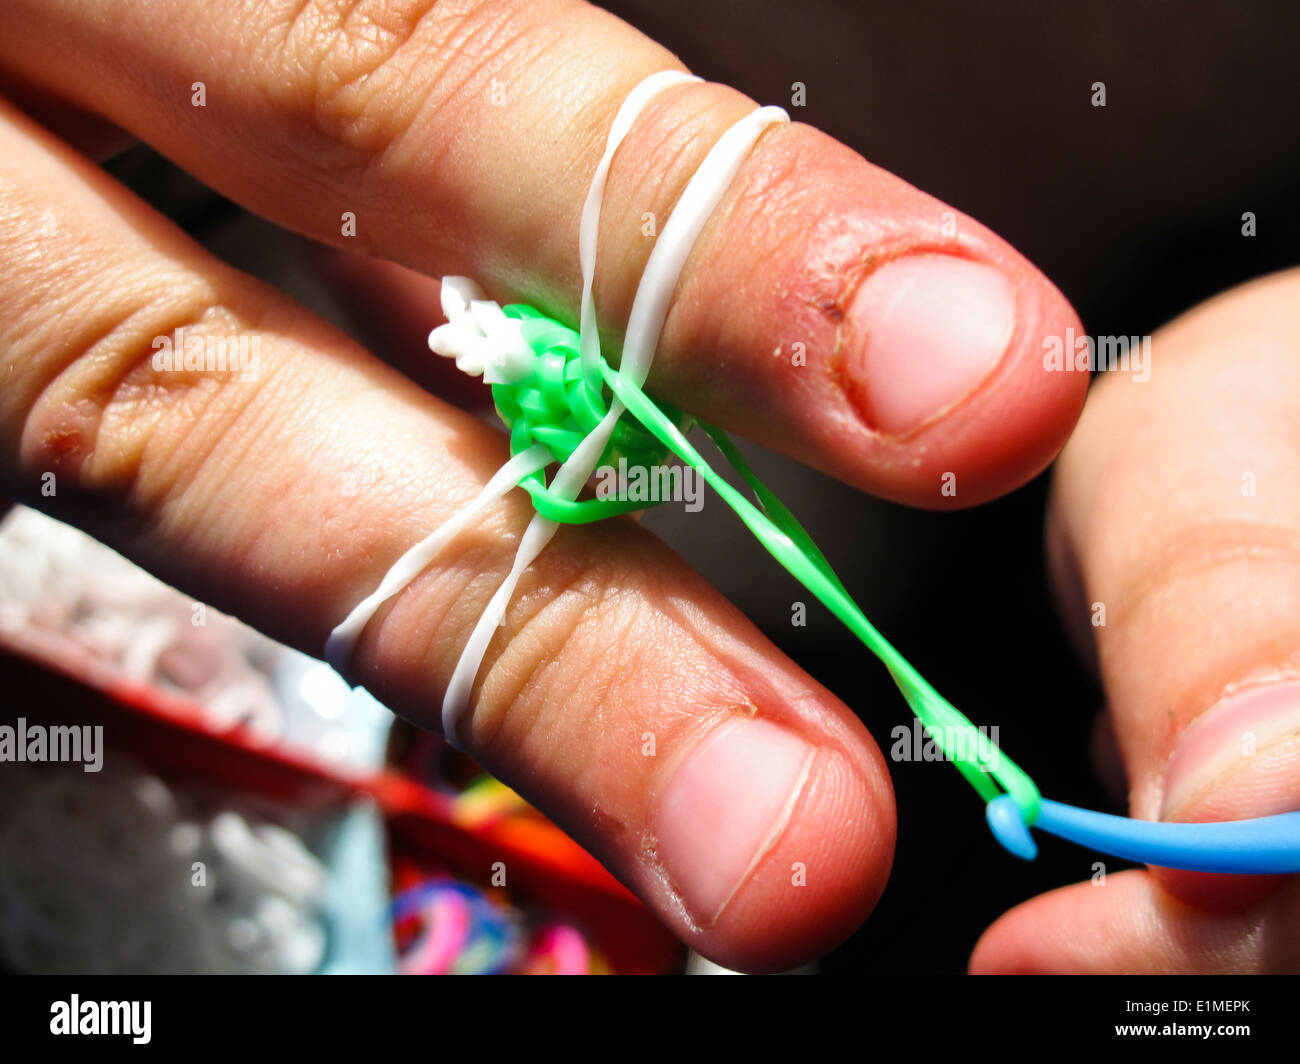 Young girl making rainbow loom bracelet on her fingers Stock Photo - Alamy